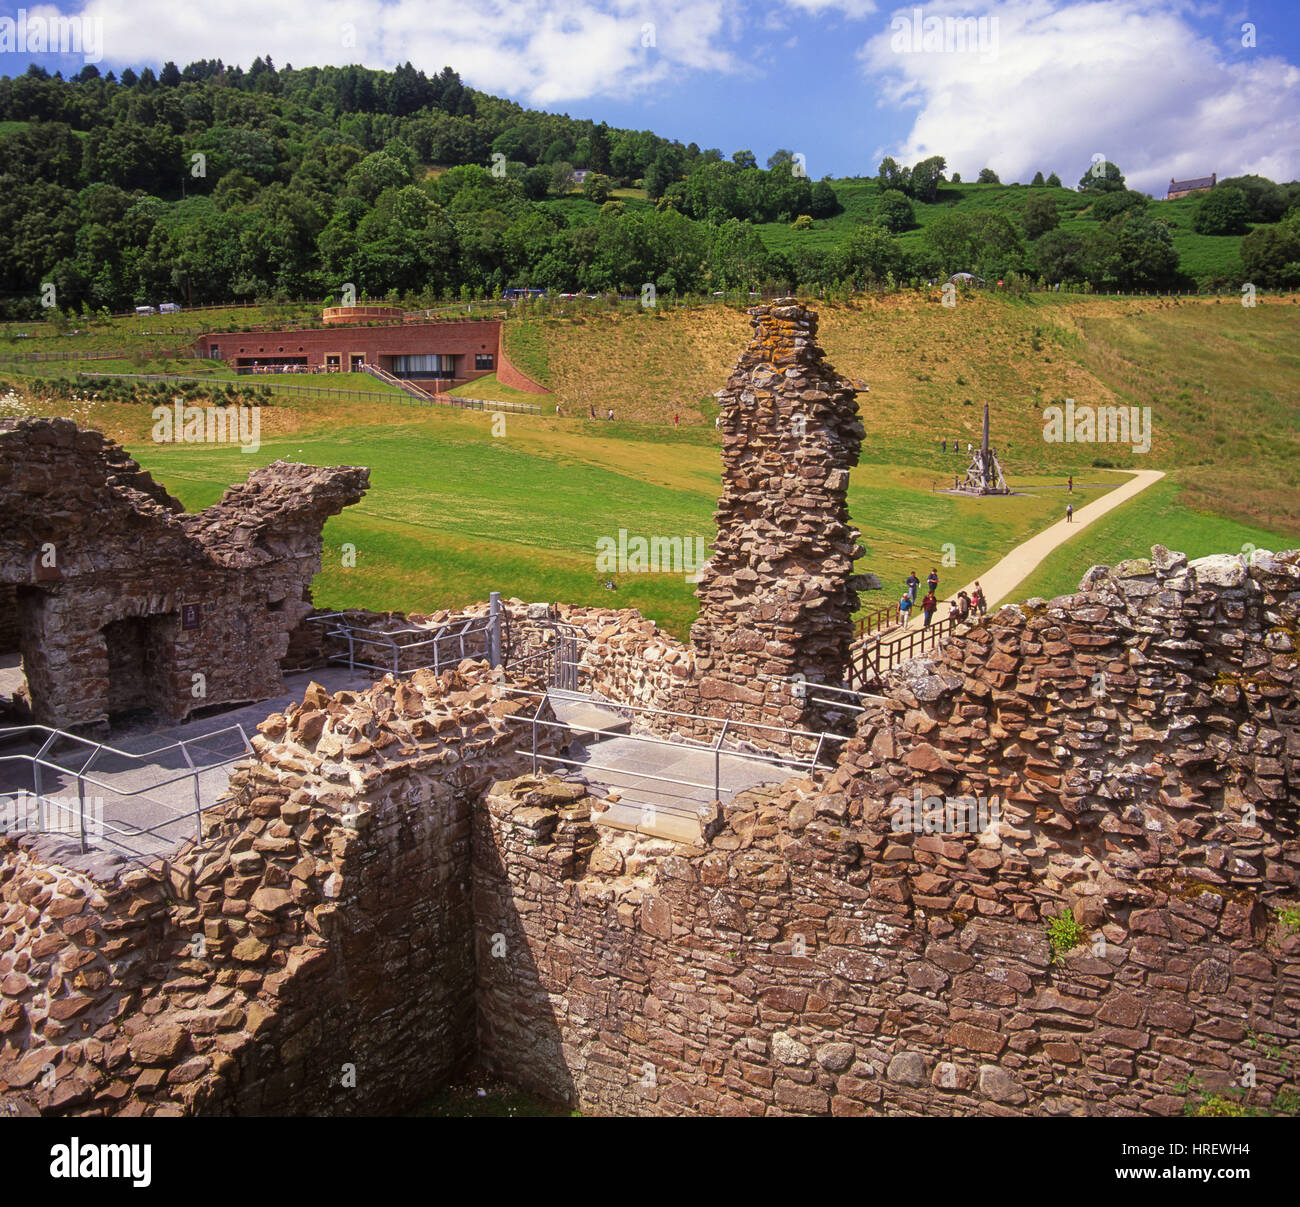 Looking towards the Urquhart castle Vistor Centre from the Castle Ruins, Loch Ness, Highlands. Stock Photo